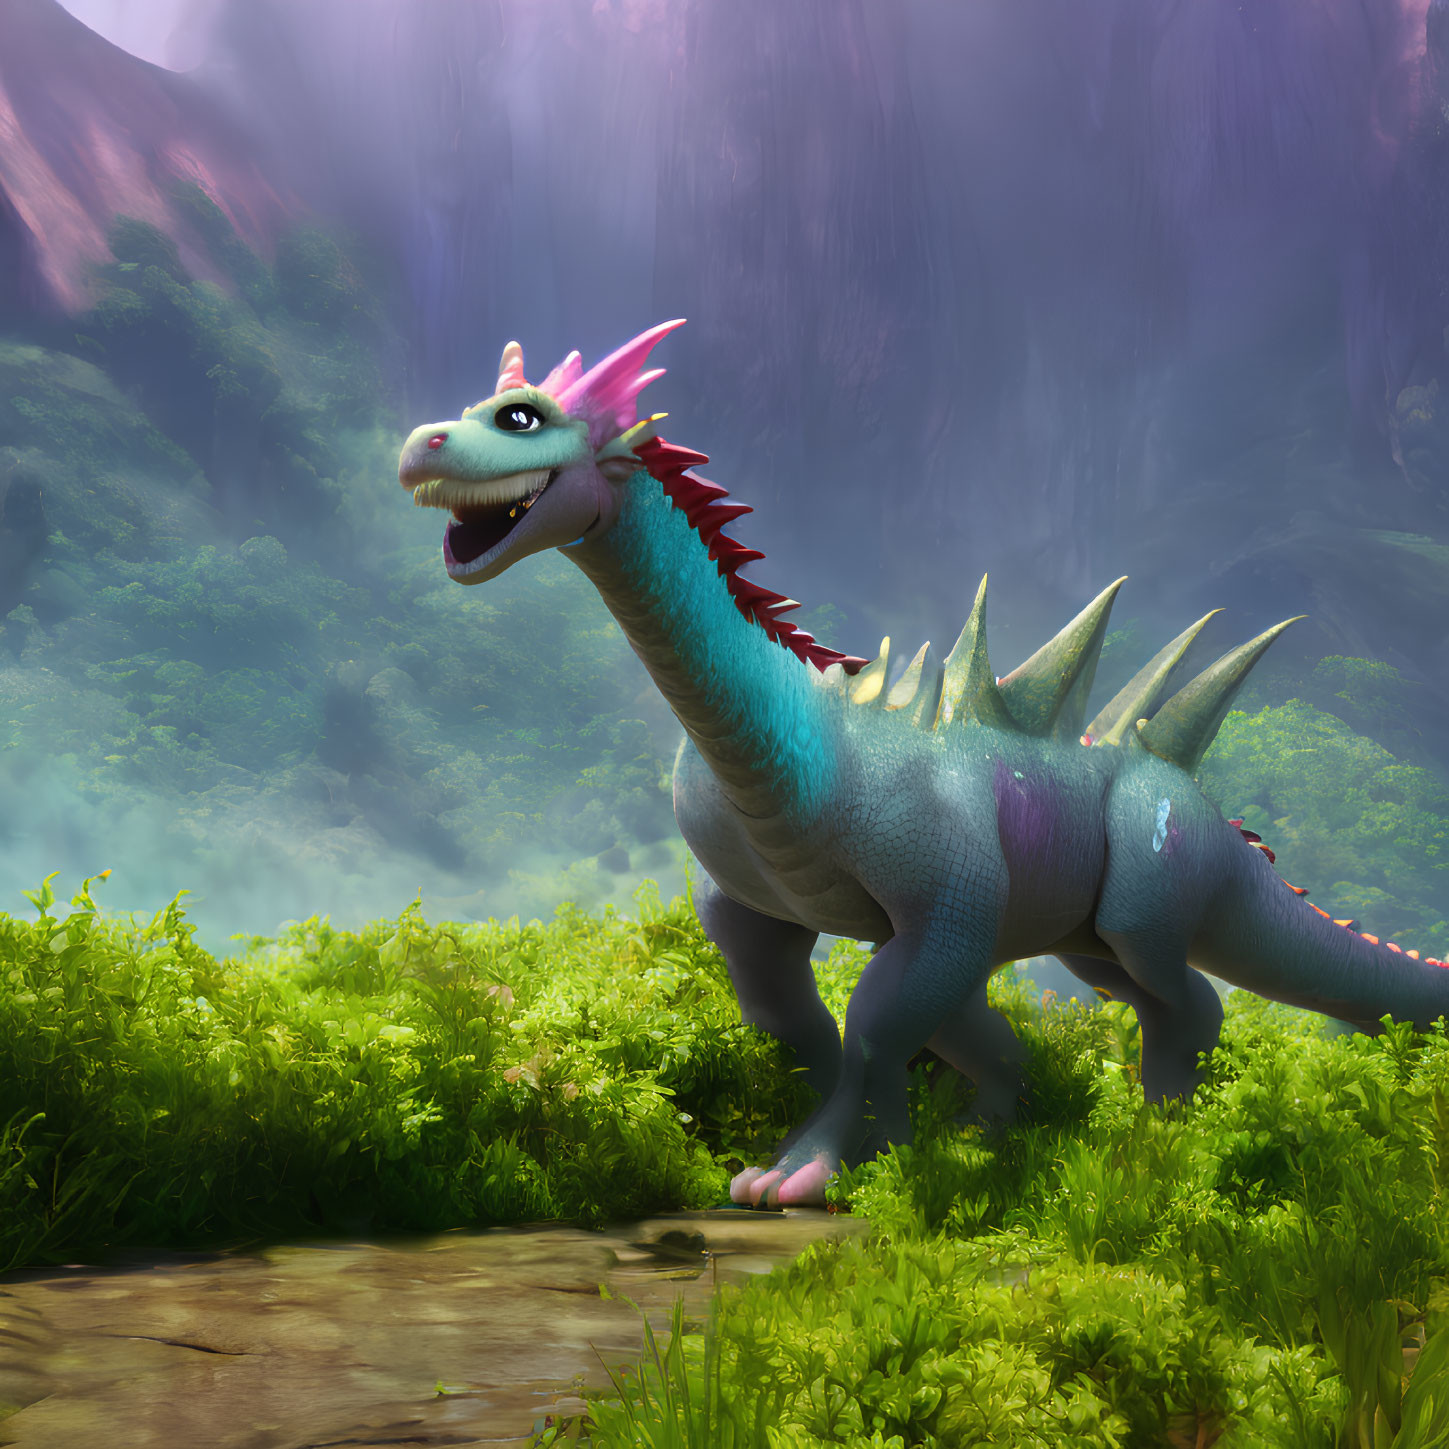 Colorful cartoon dinosaur in lush forest clearing surrounded by cliffs